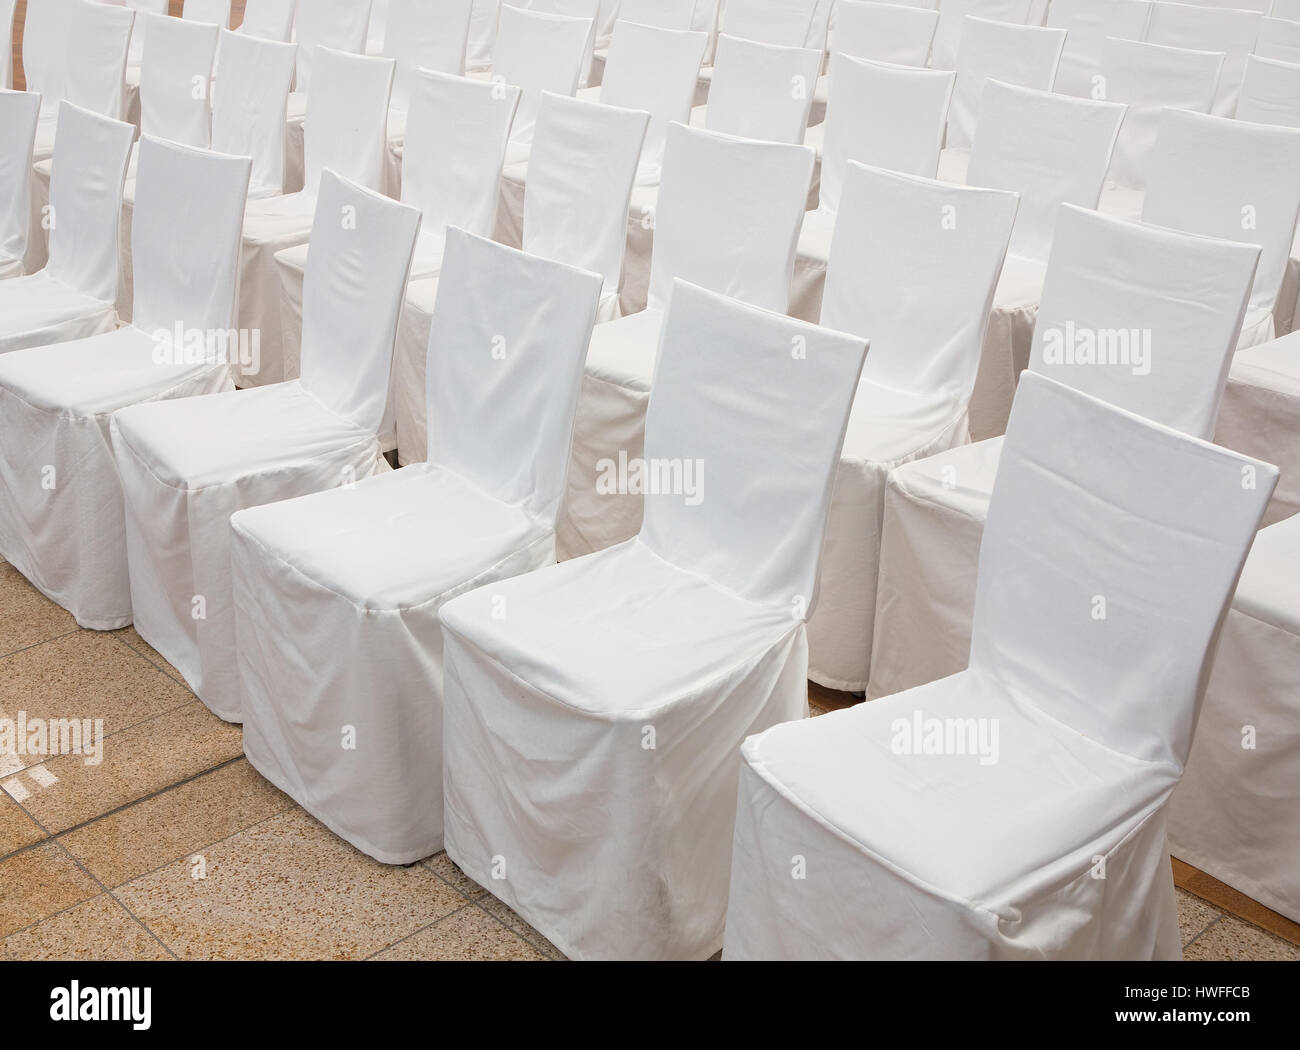 Row of chairs with white fabric covers Stock Photo